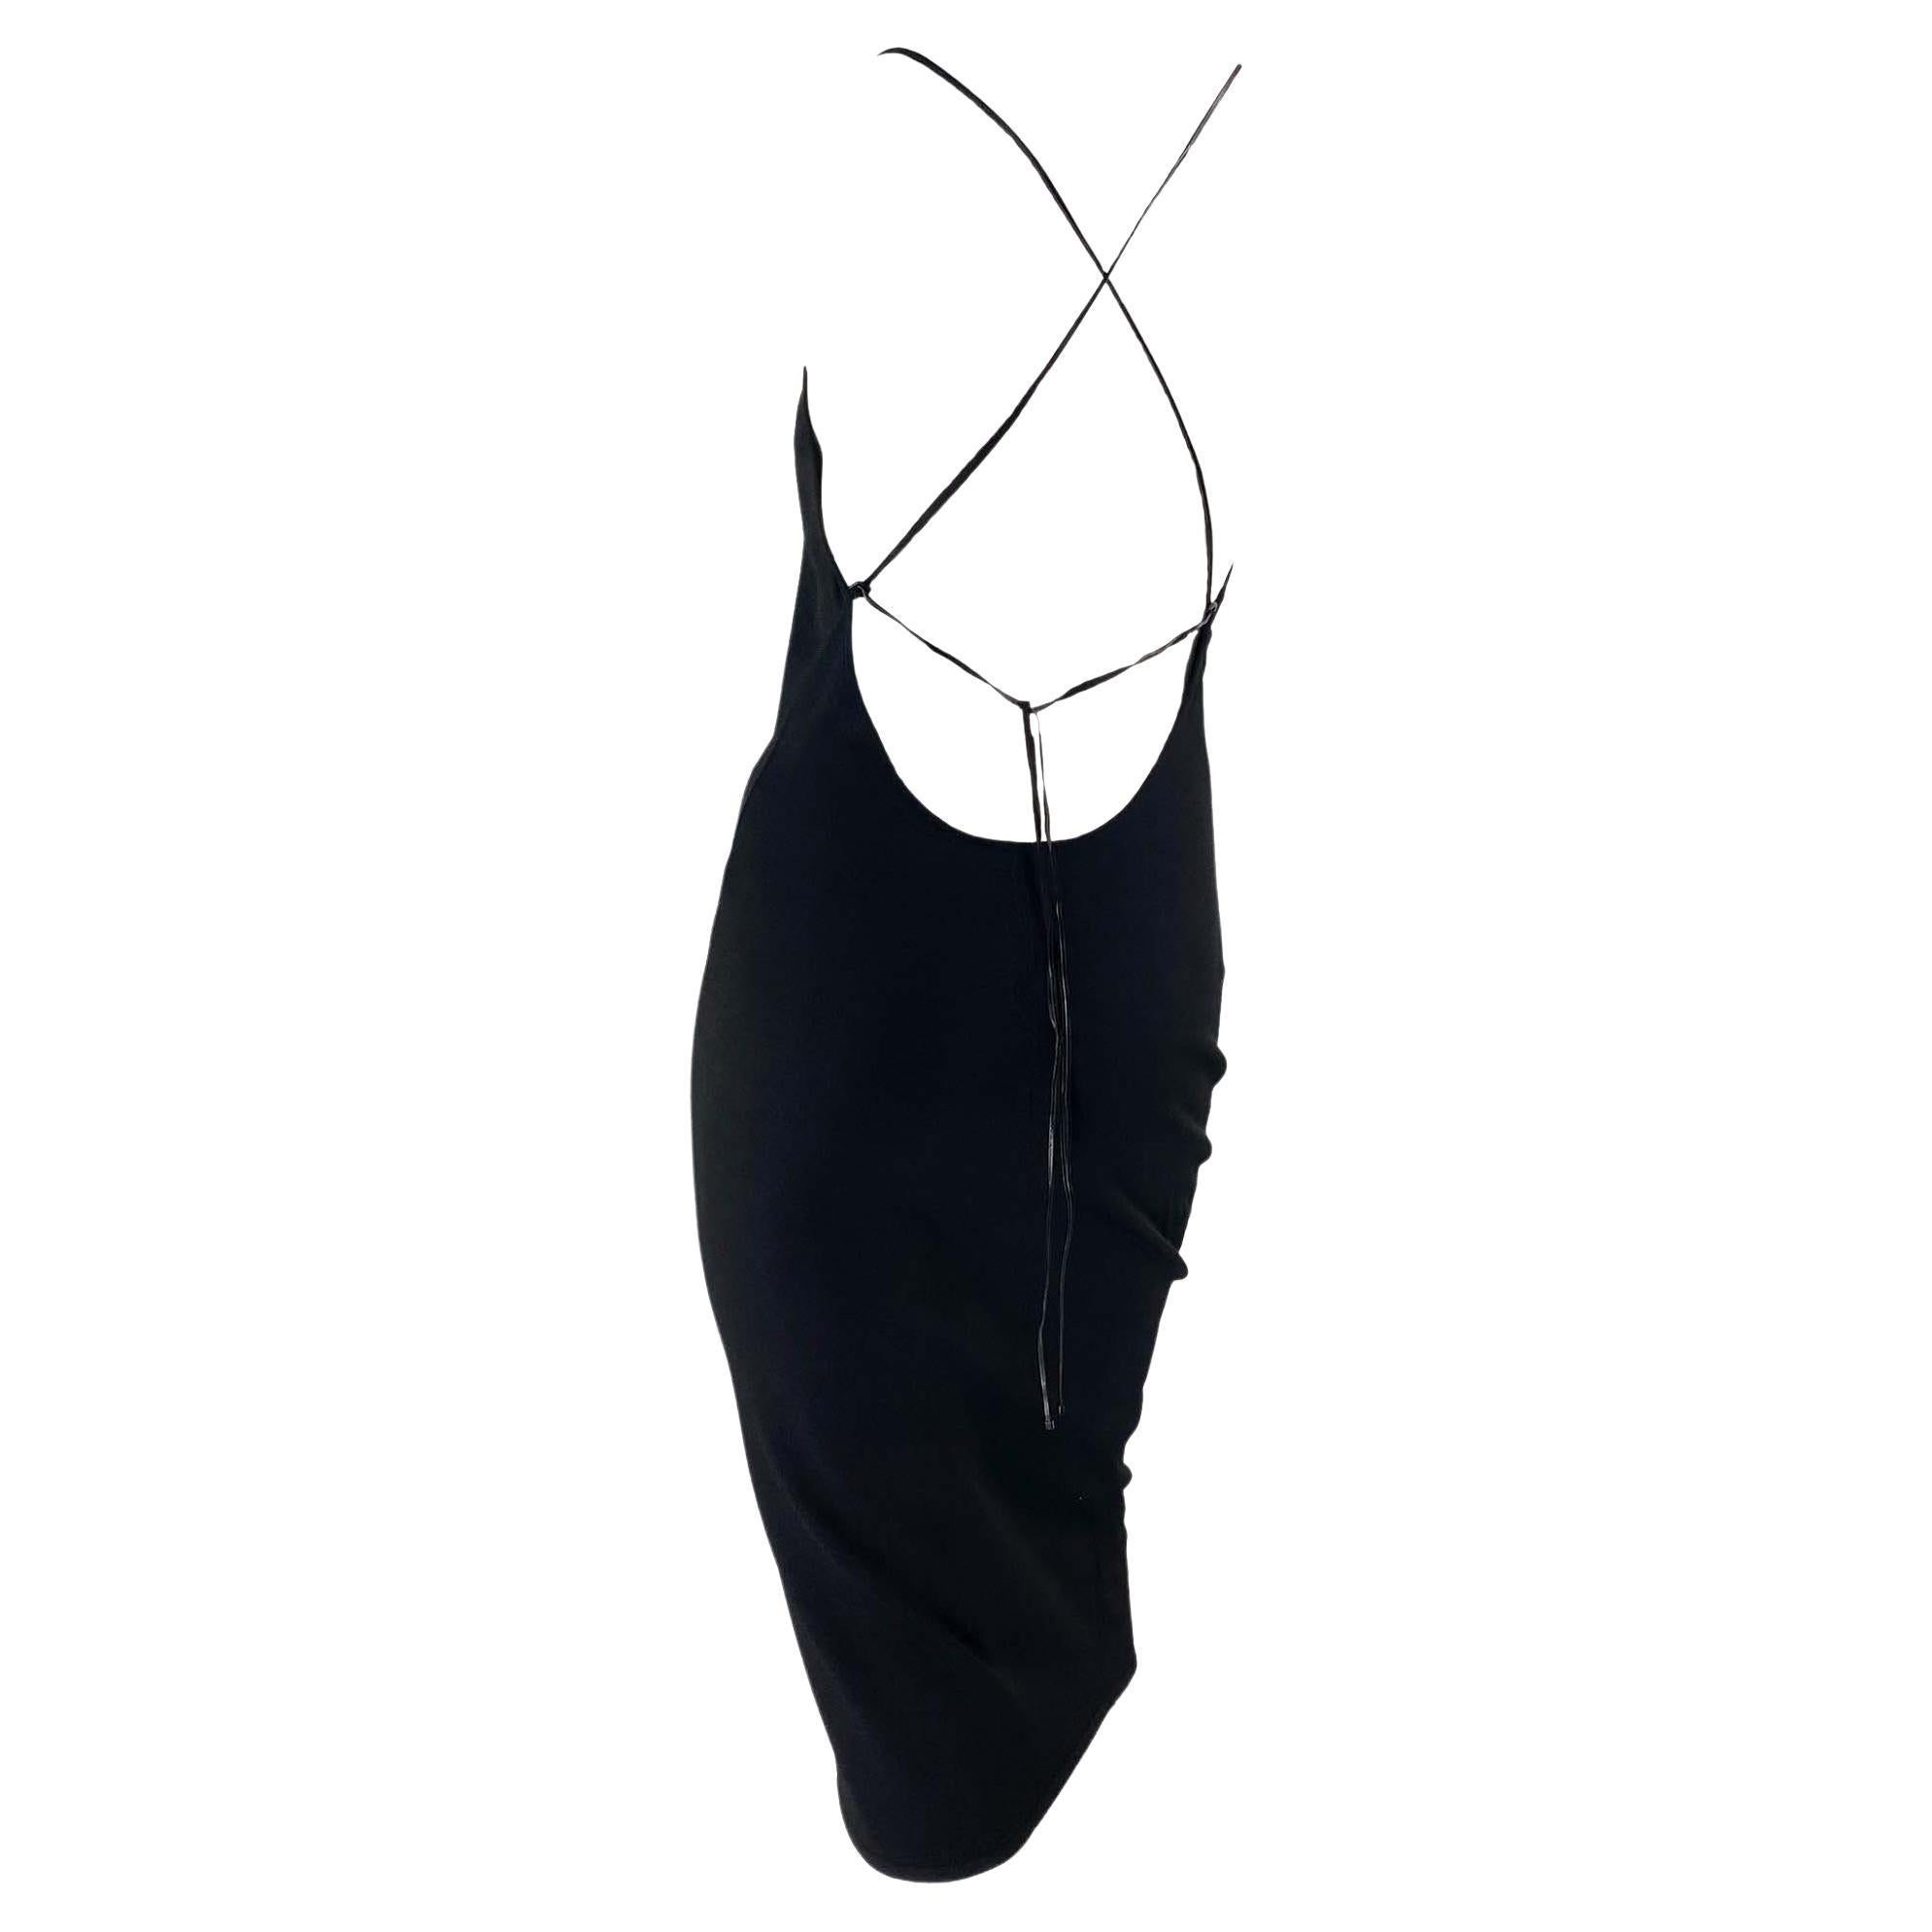 S/S 2000 Gucci by Tom Ford Black Leather Strap Lace Up Backless Knit Dress